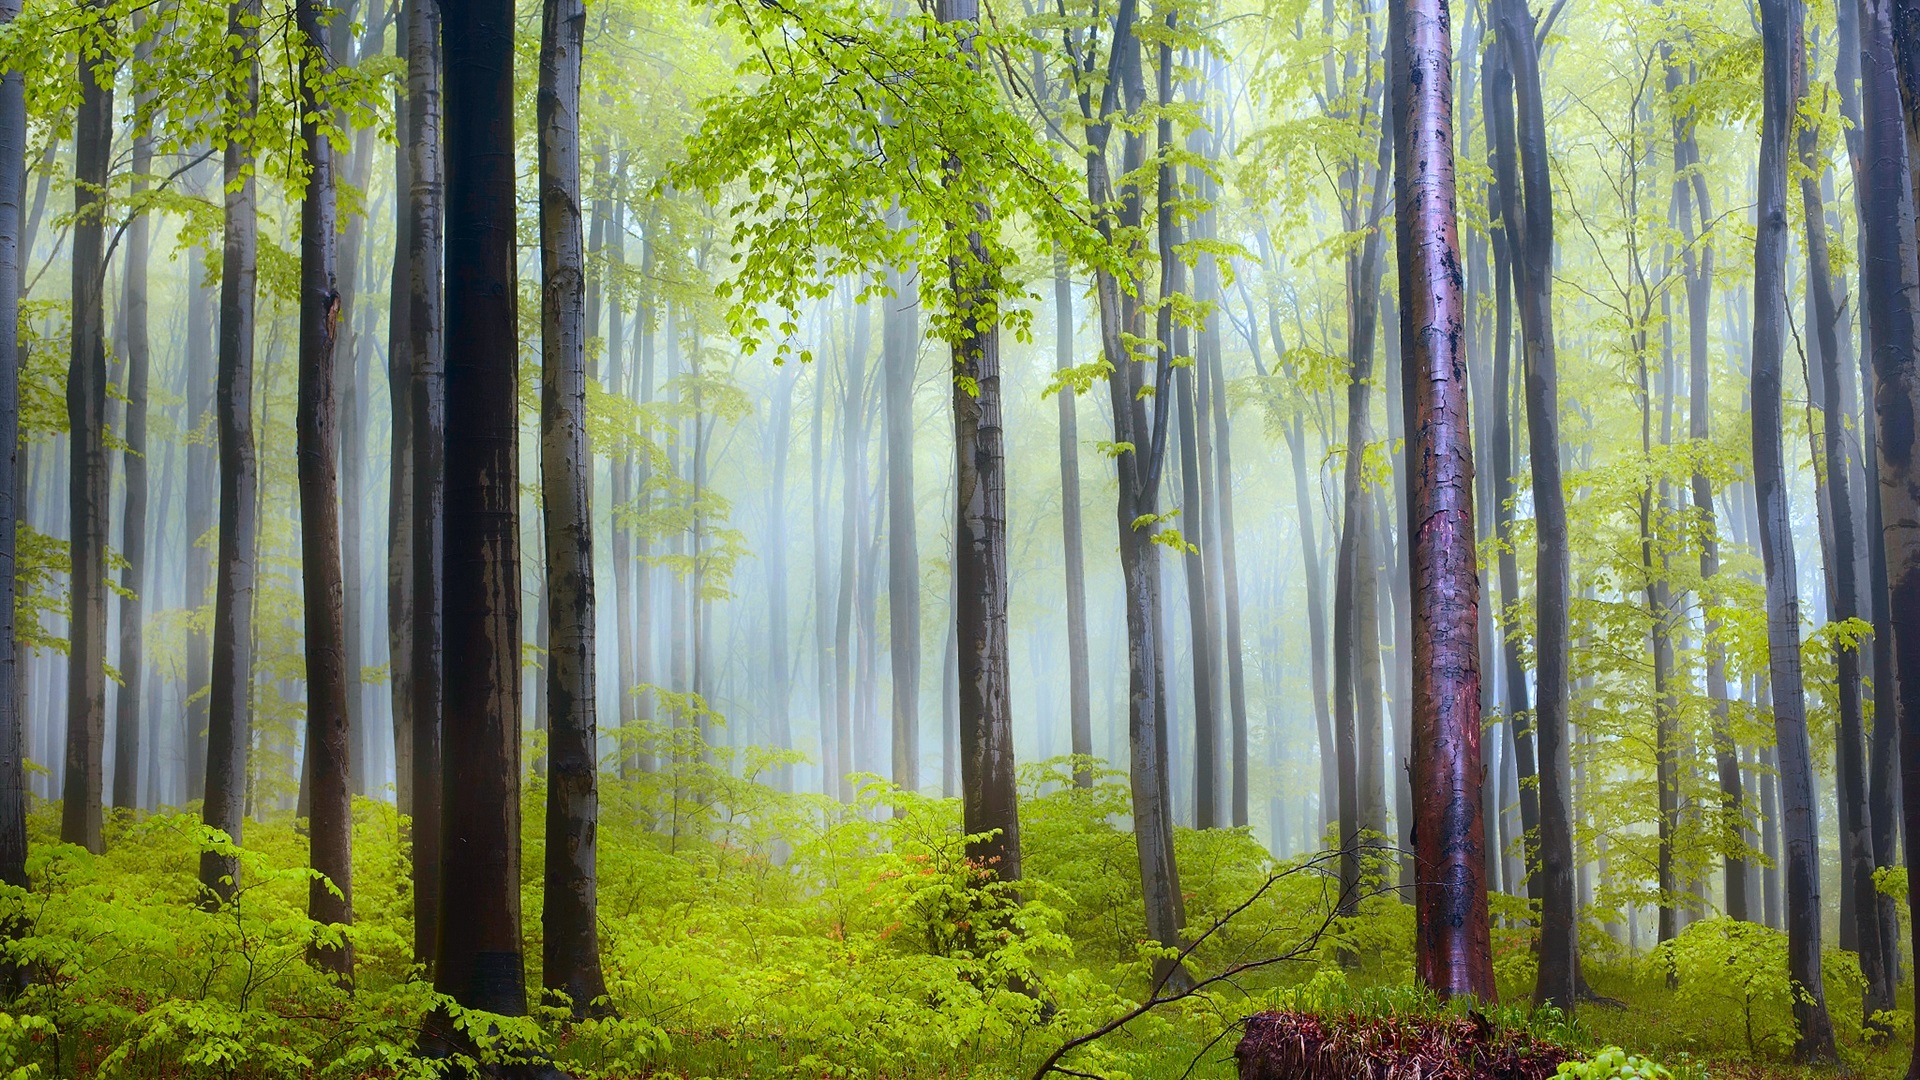 General 1920x1080 nature forest trees plants mist